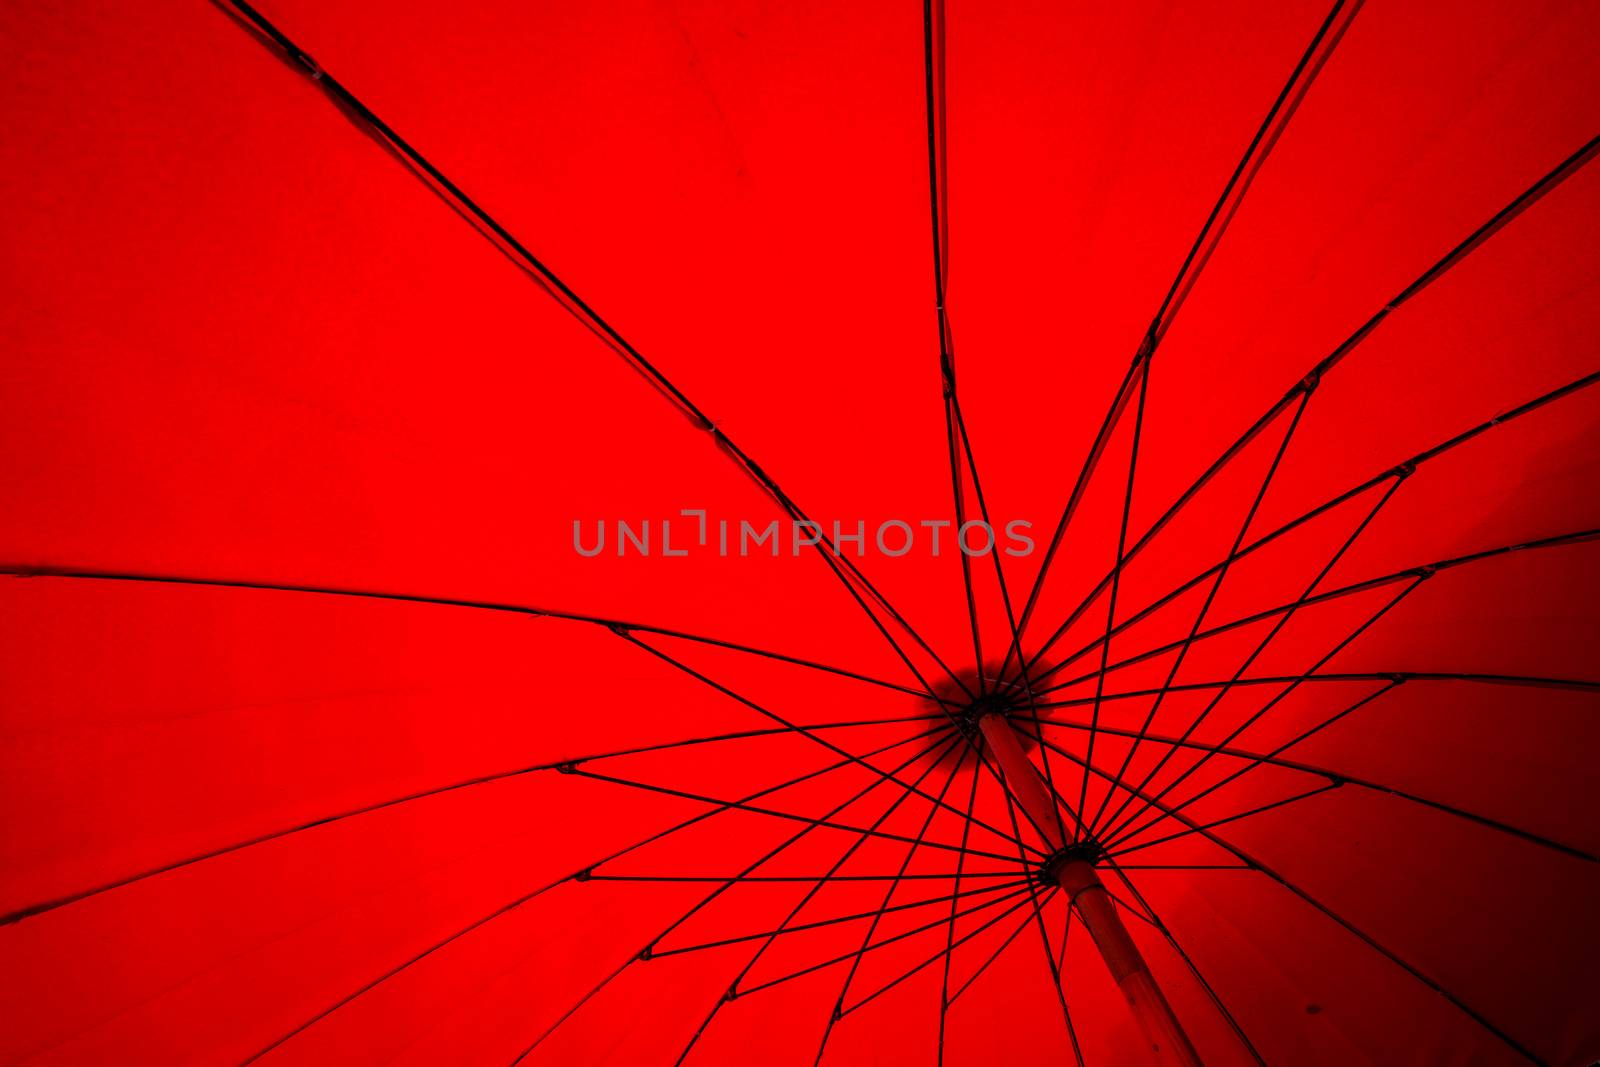 red umbrella canvas by antpkr